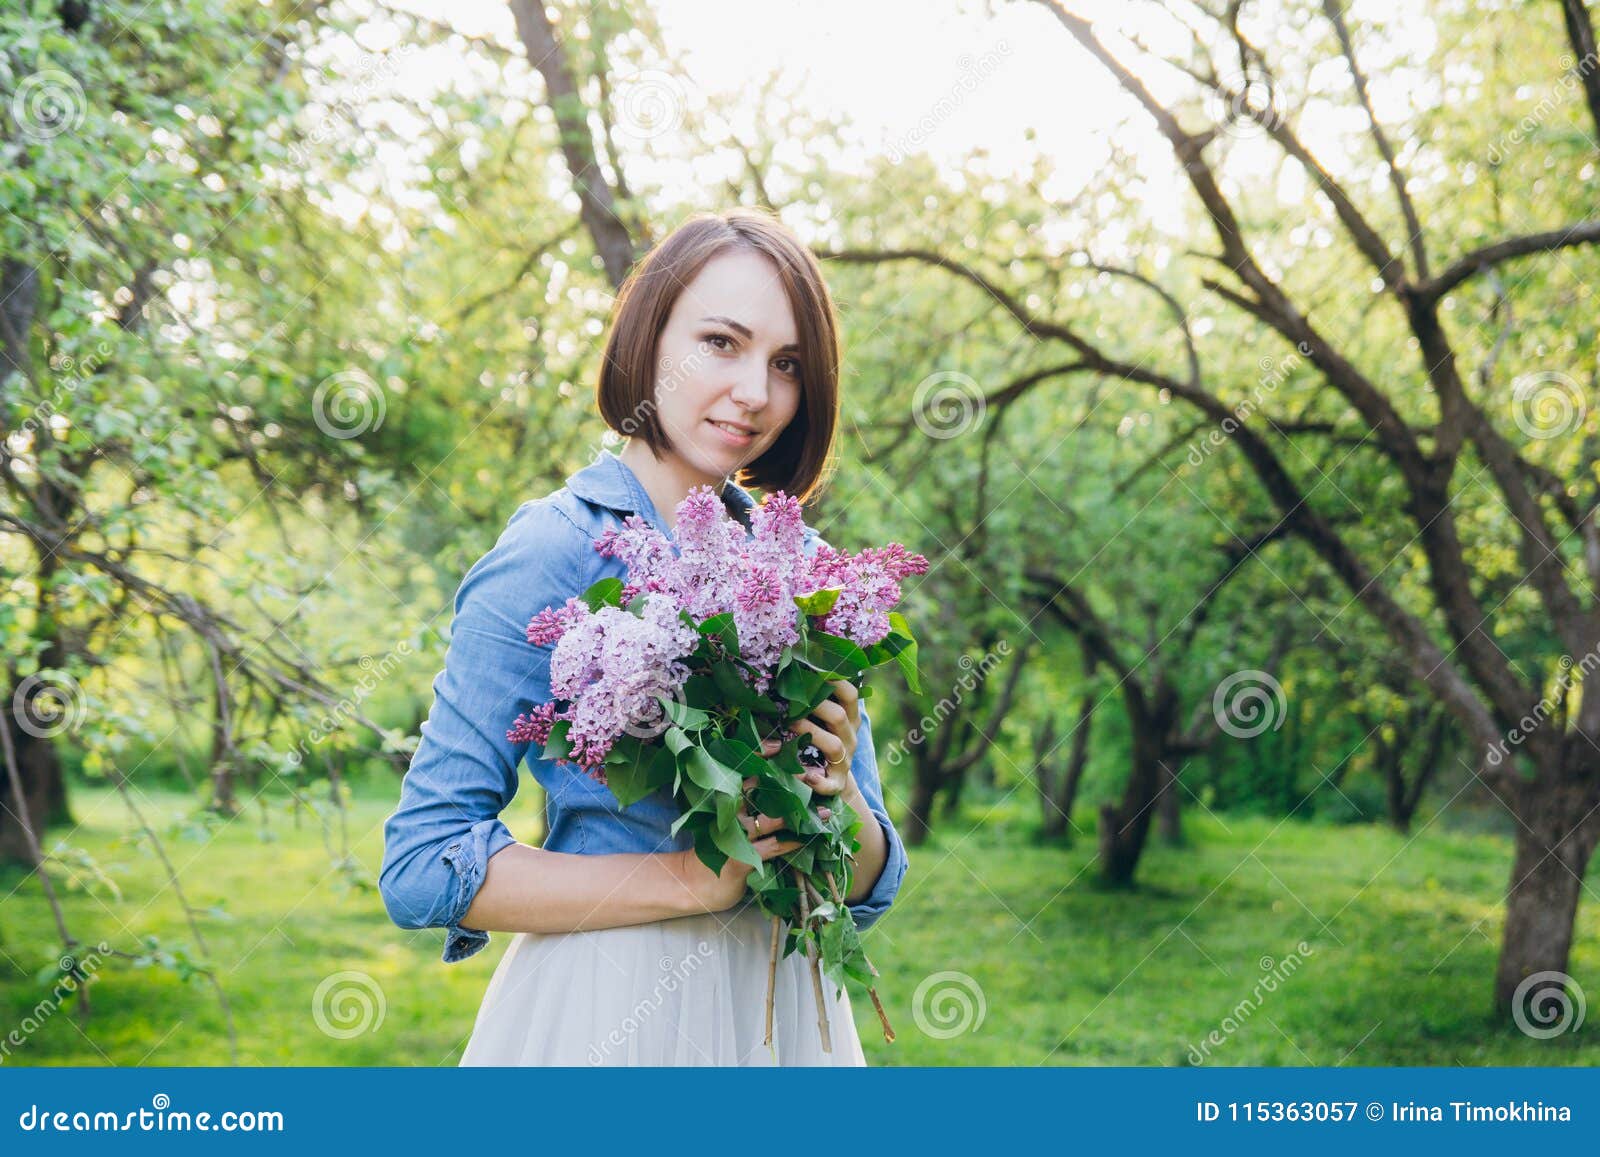 Girl Posing with a Bouquet of Lilac Stock Image - Image of female, lady ...